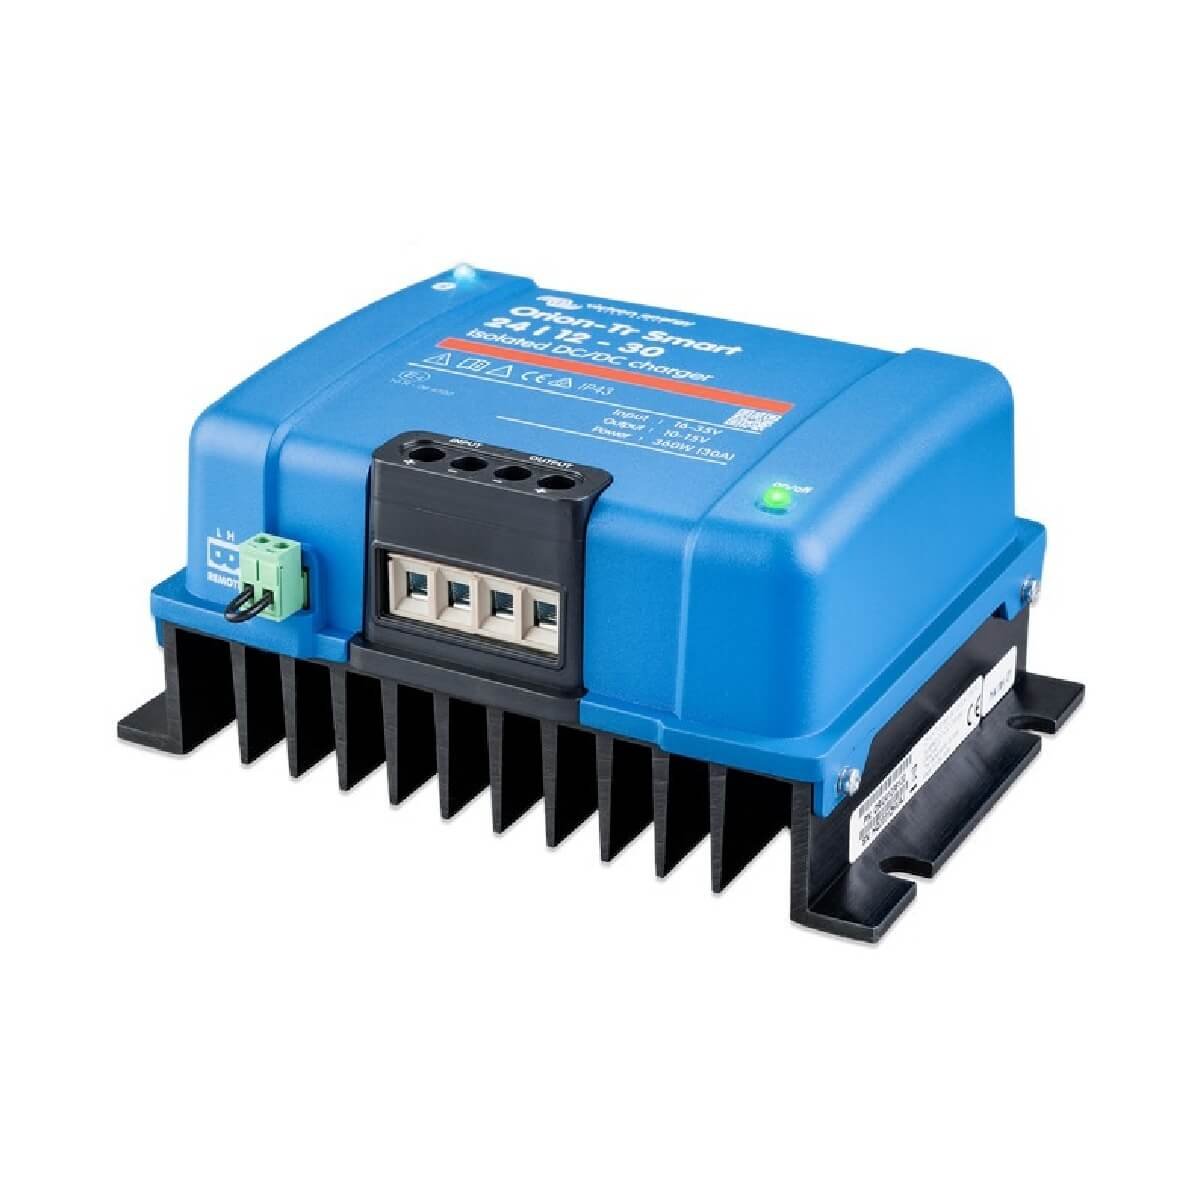 A blue electronic device with four terminal ports and a black heat sink at the bottom.